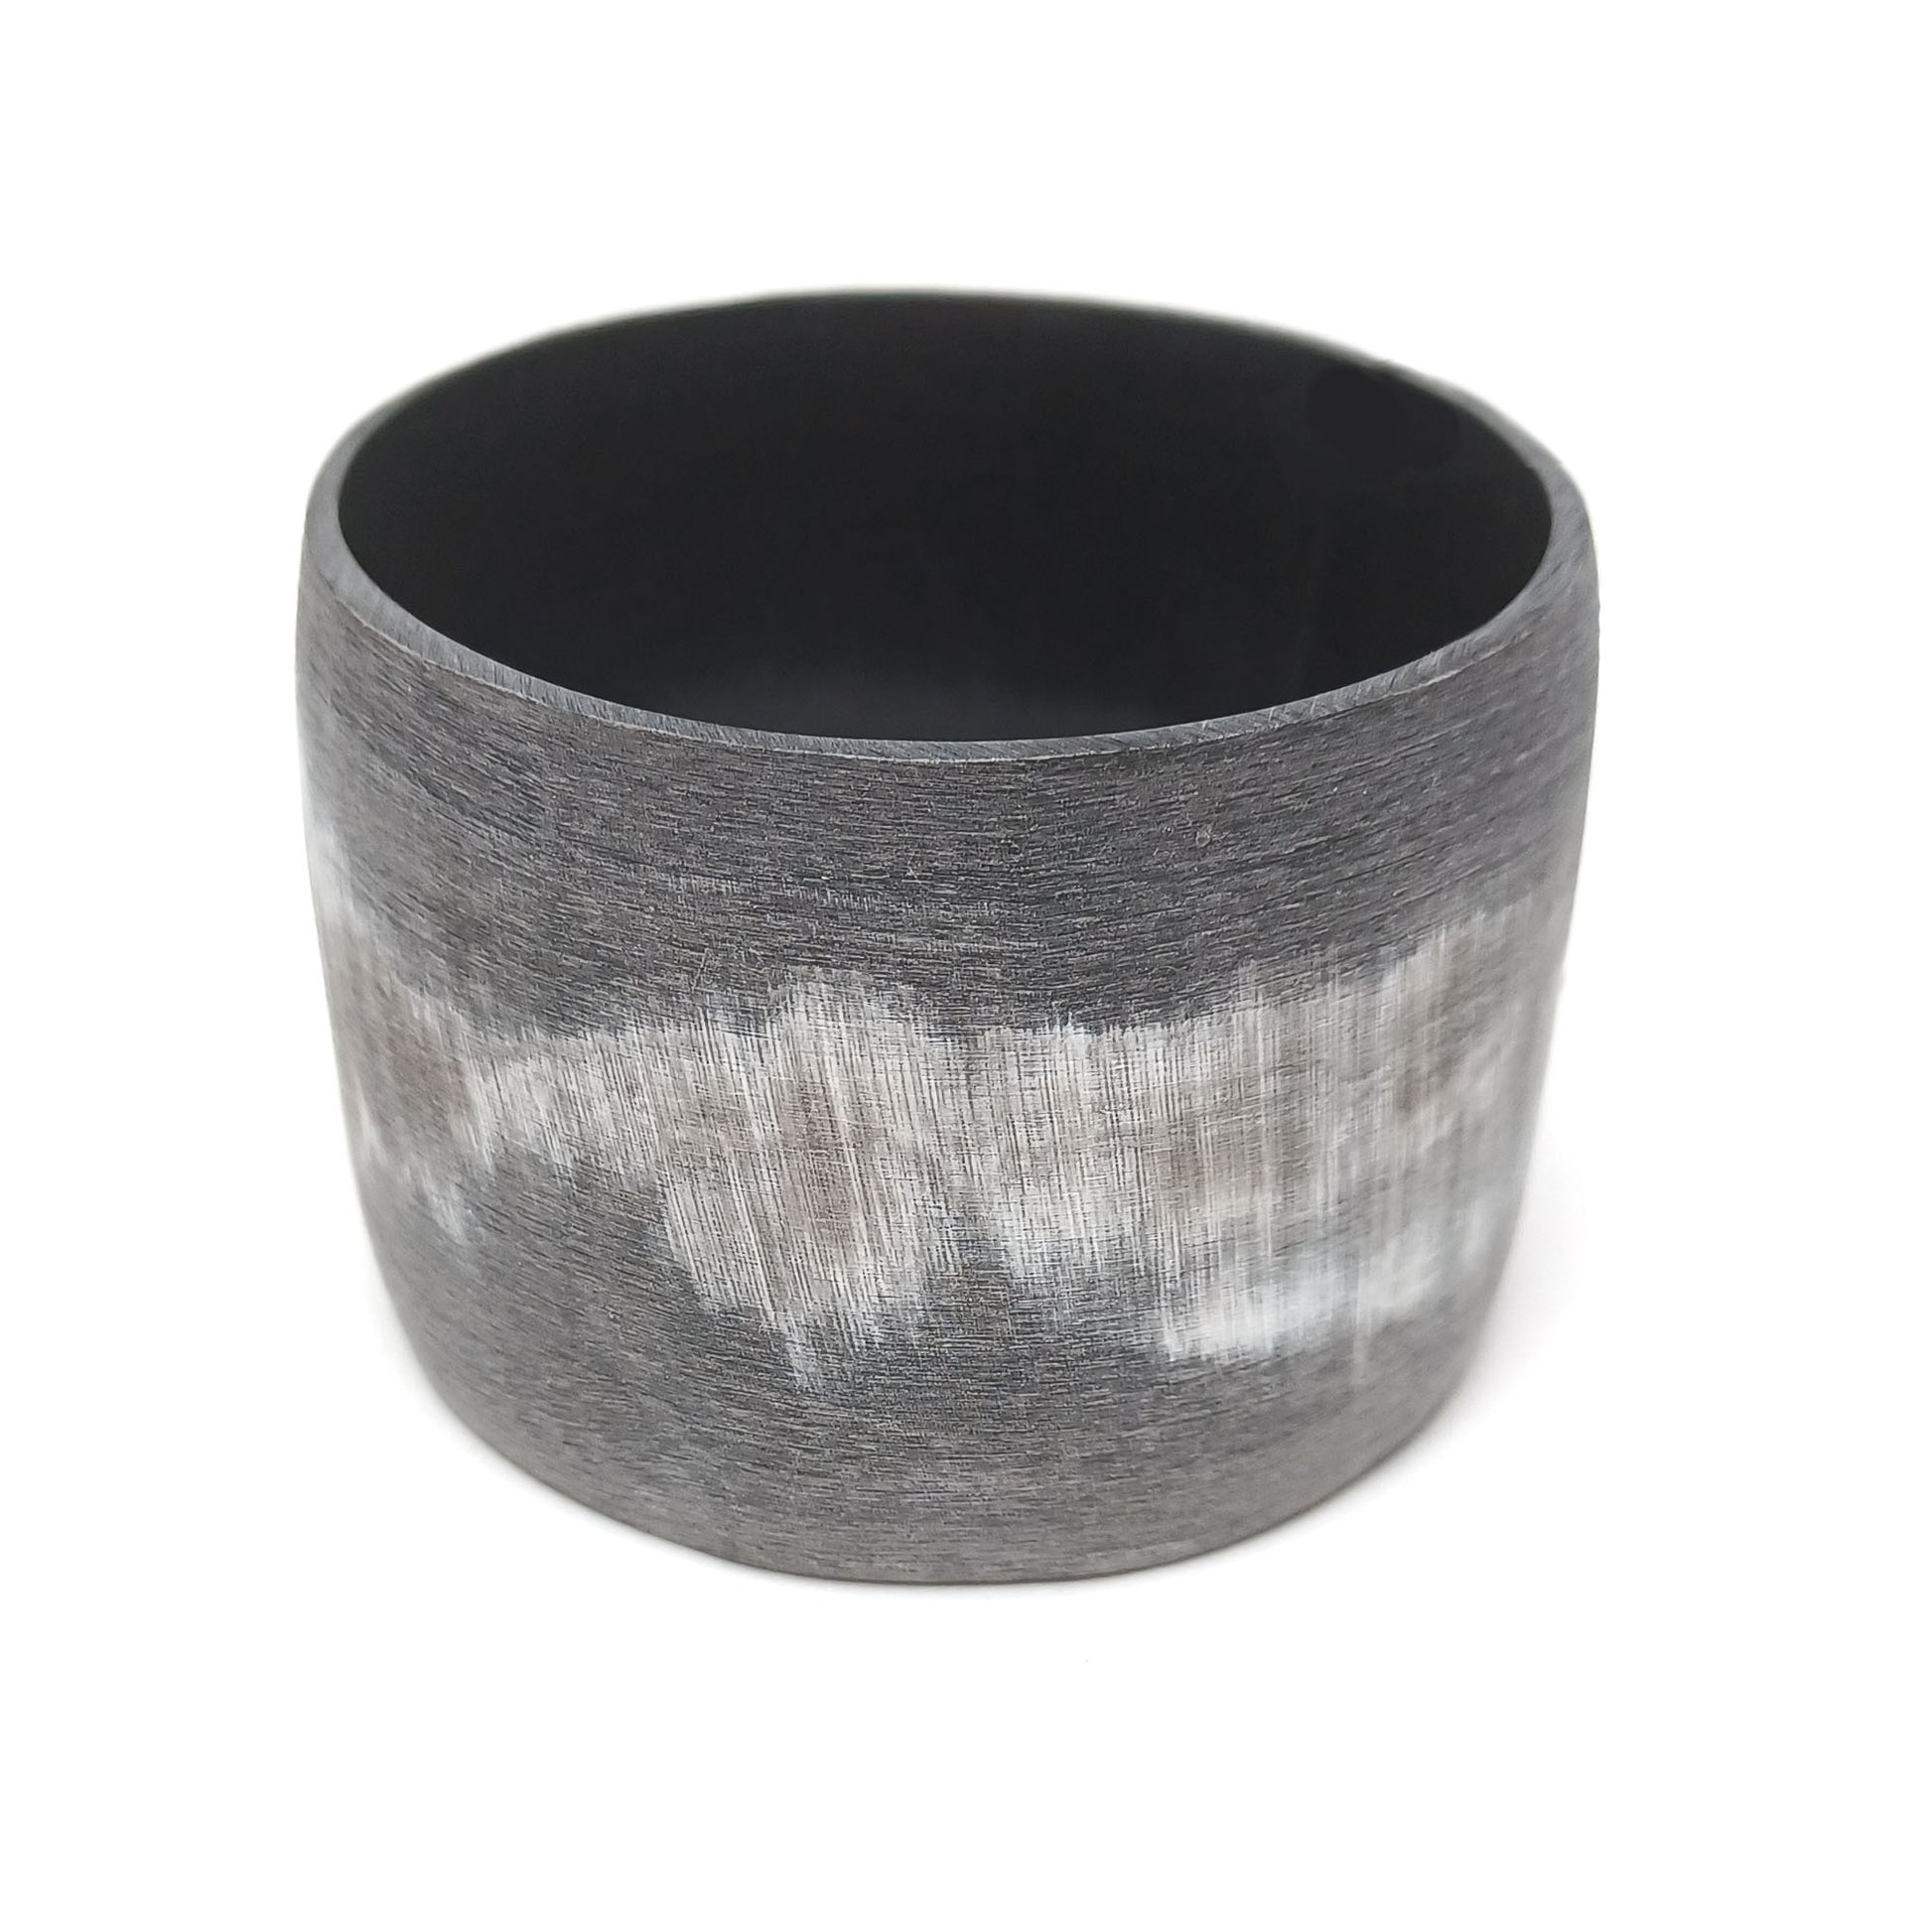 Wide buffalo horn bangle with natural markings